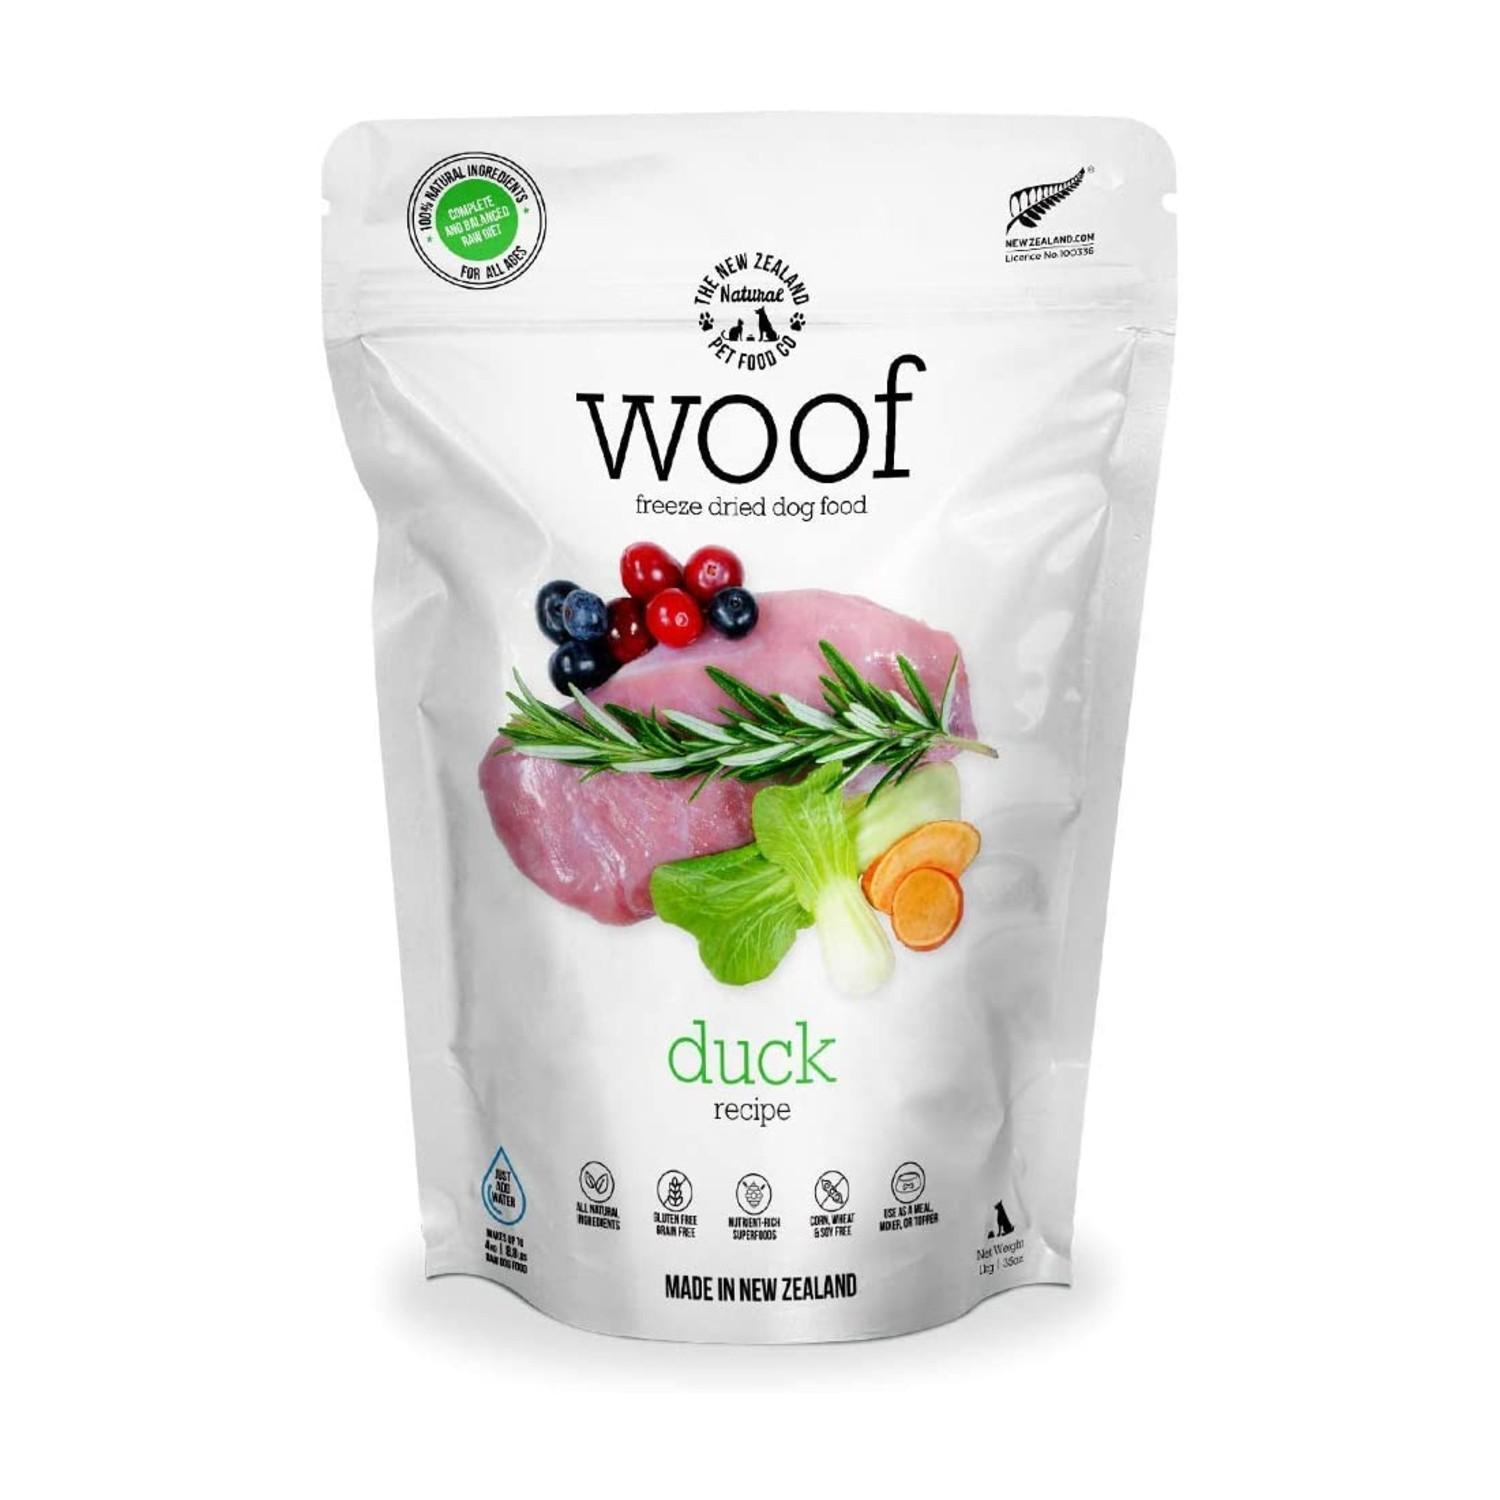 The New Zealand Natural Pet Food Co. Woof Freeze Dried Dog Food - Duck